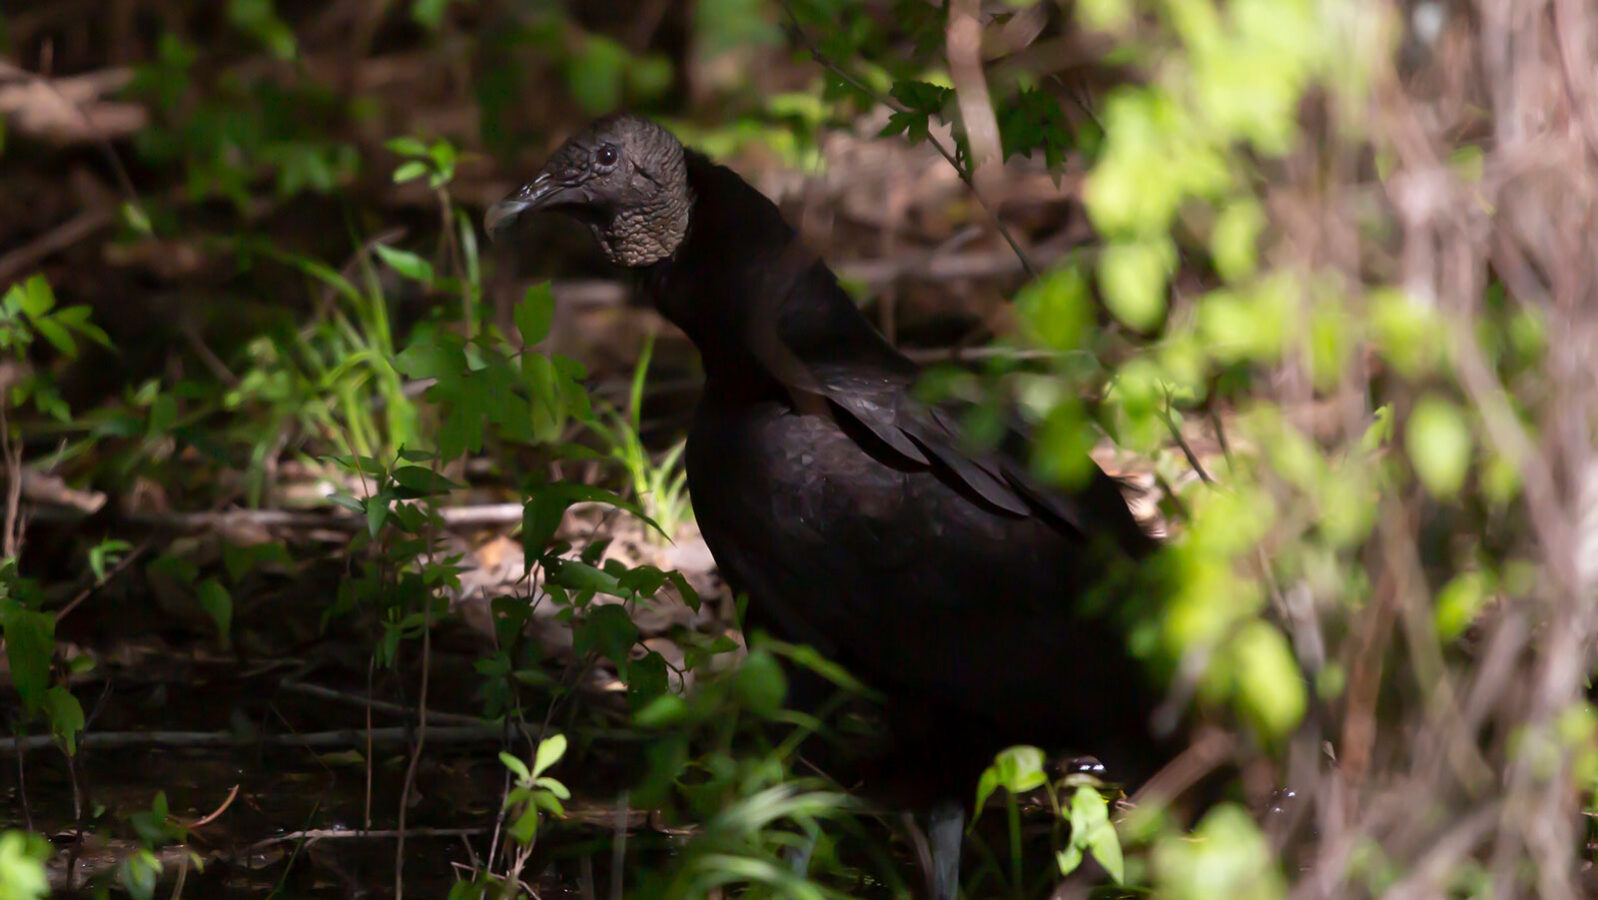 Black vulture in the forest on the ground